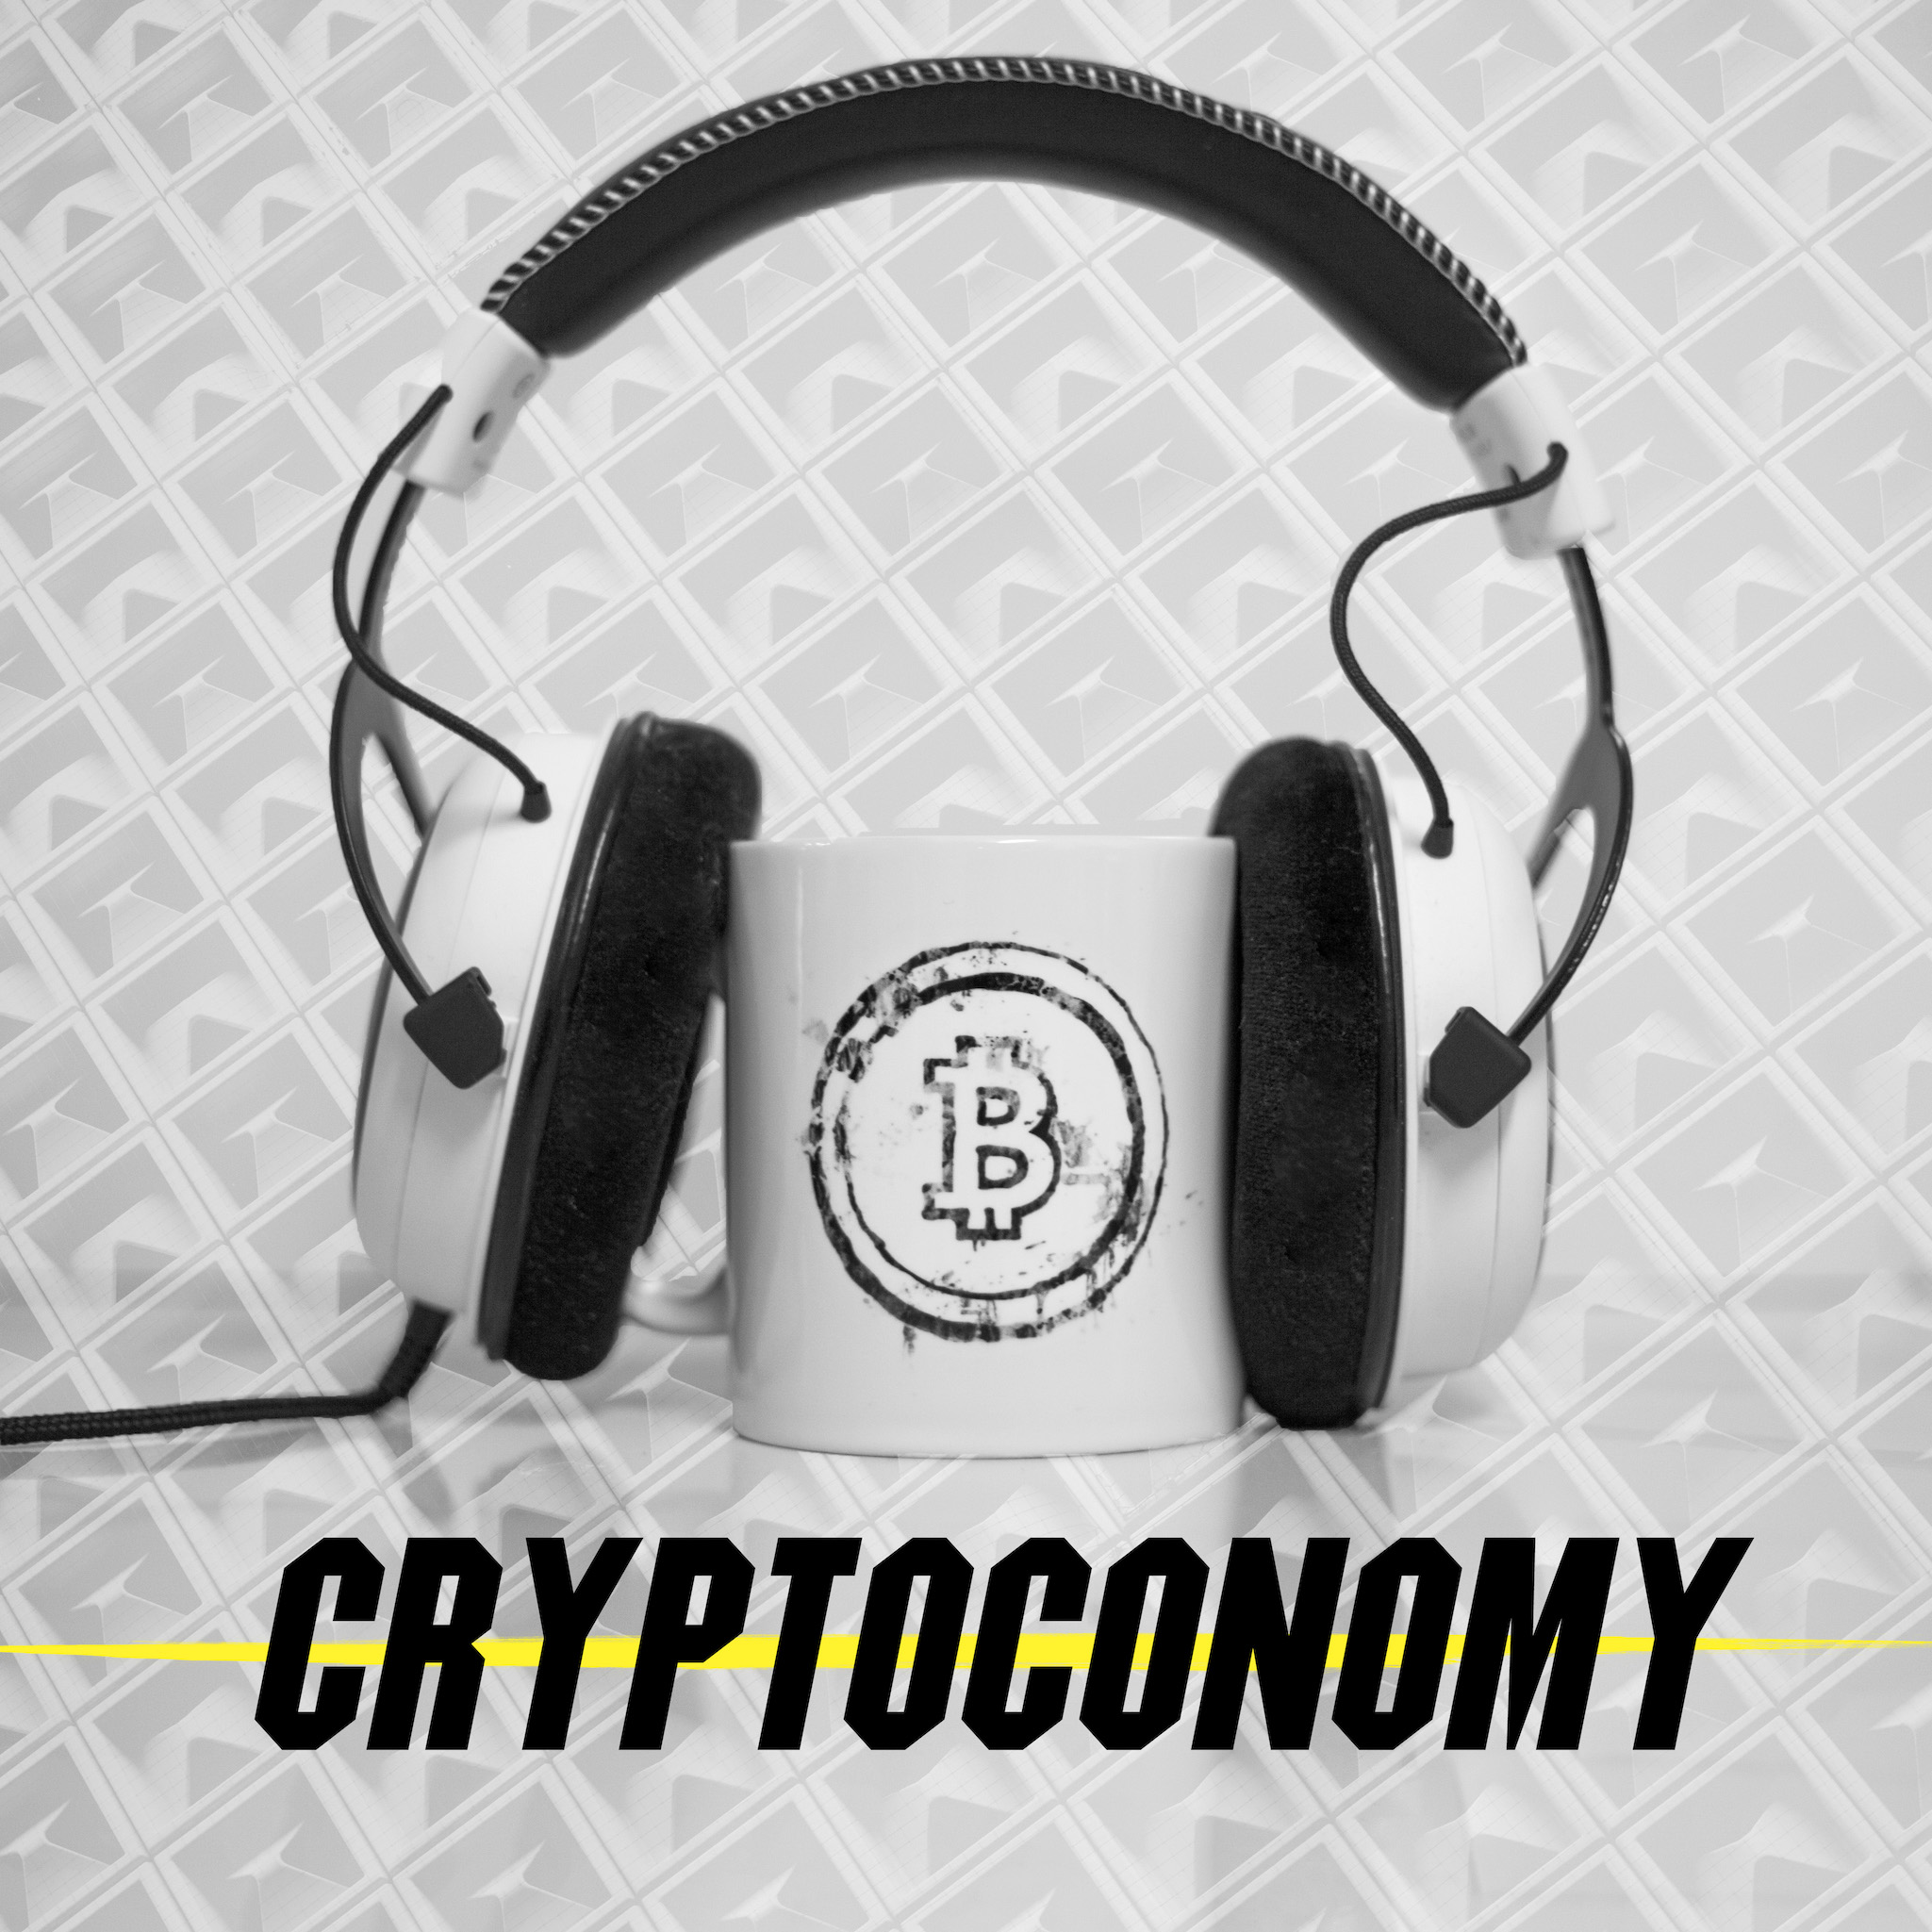 CryptoQuikRead_135 - The Hard Thing About Learning Hard Things